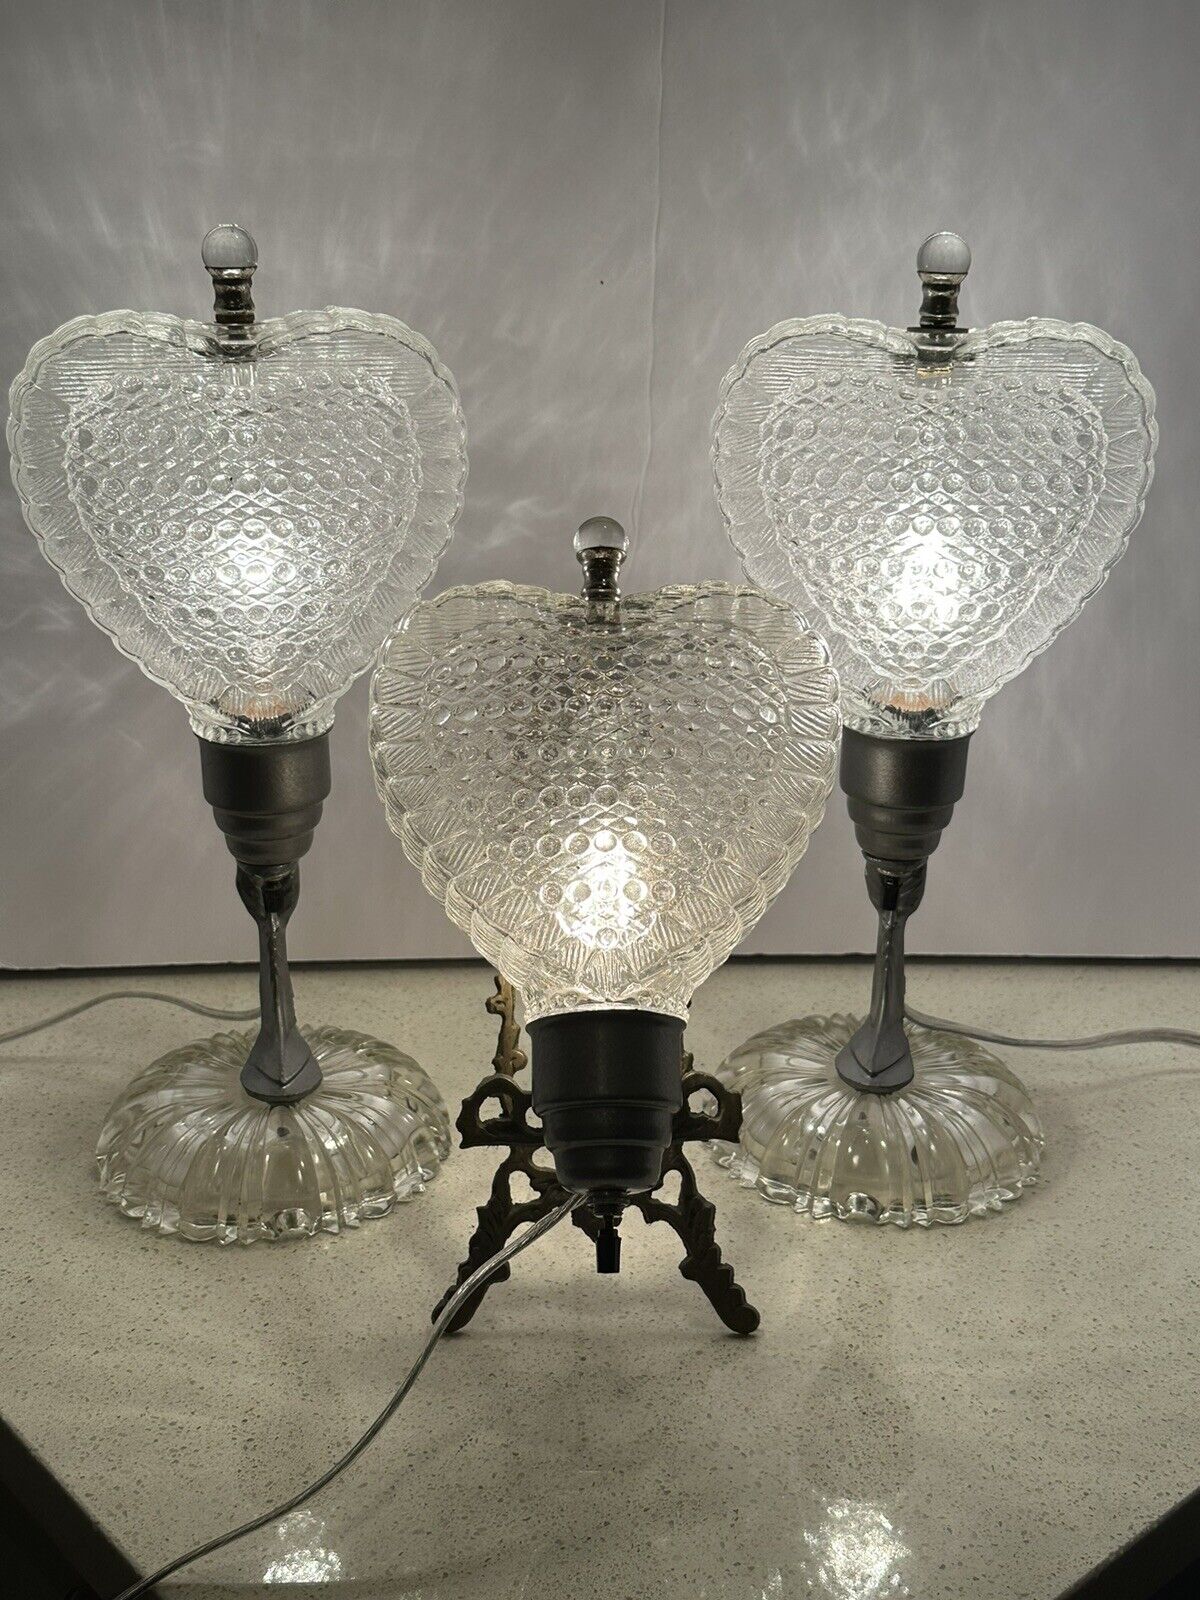 Rare 1930/40s Art Deco Glass Heart Shaped Bedroom Lamps With Headboard Lamp